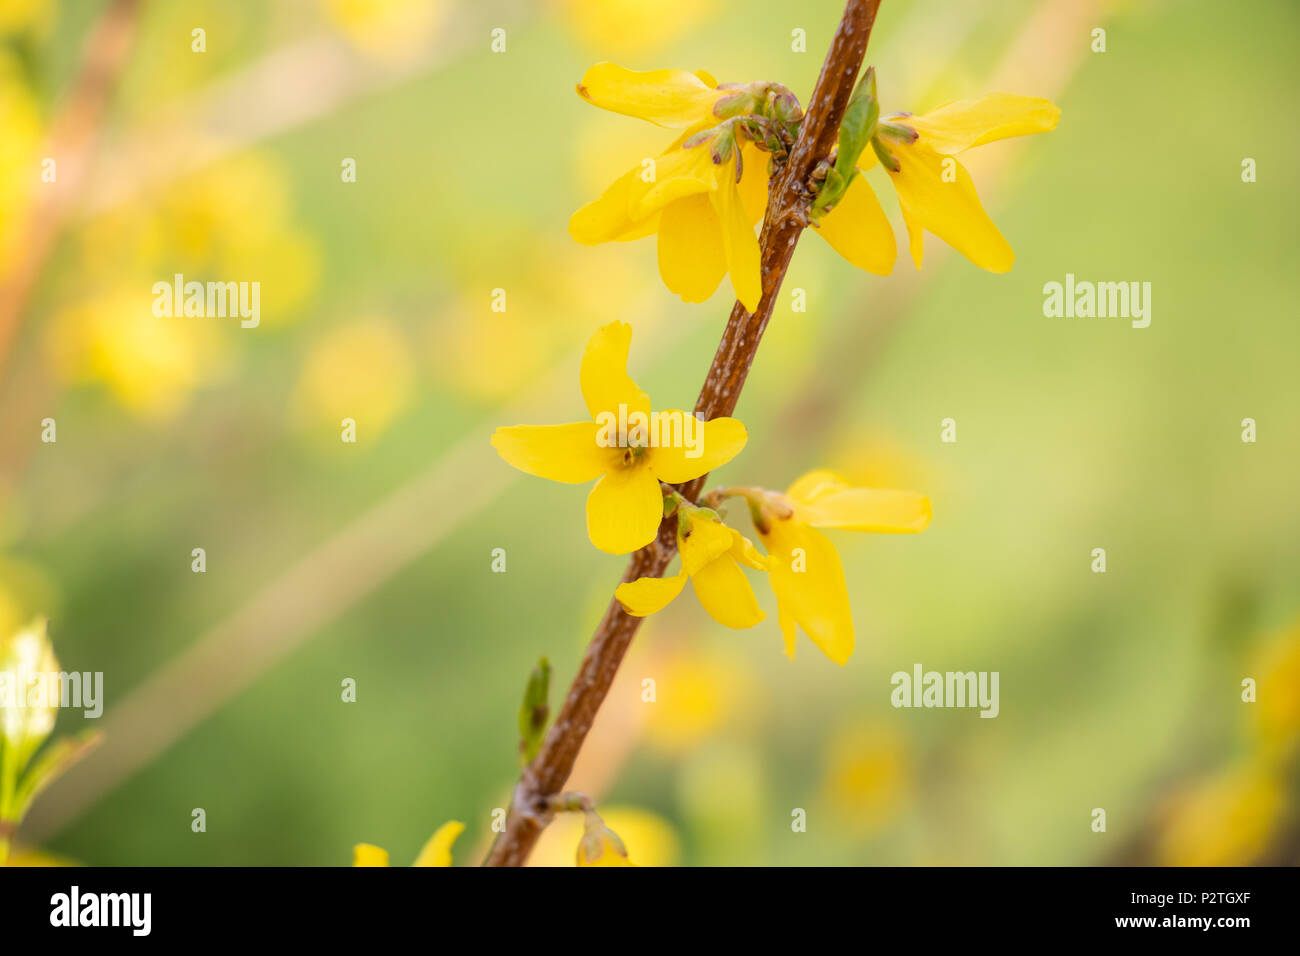 forsythia shallow depth of field green background Stock Photo